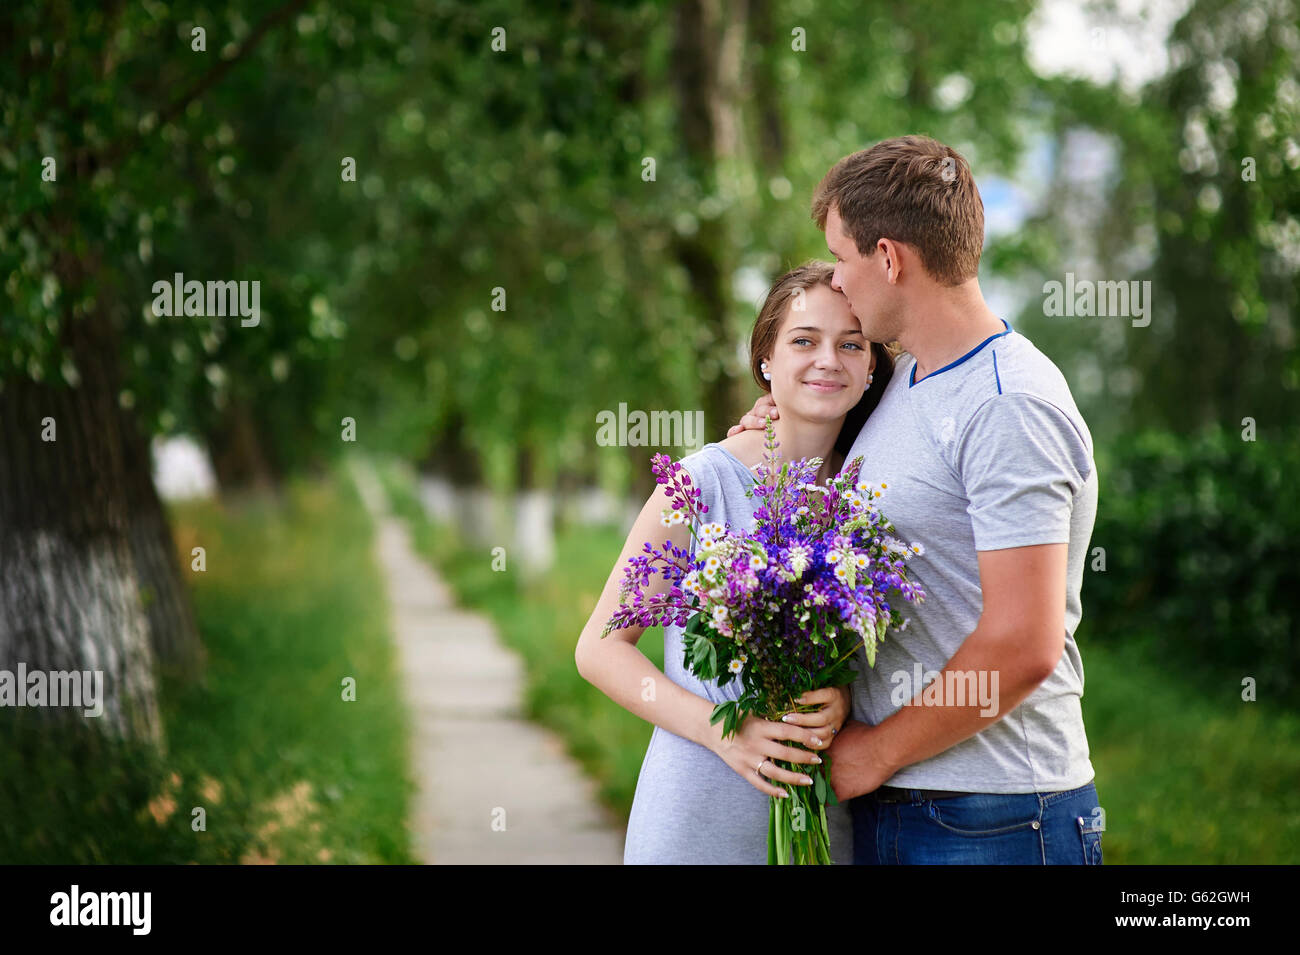 beautiful woman with long hair and a happy man hugging in park Stock Photo